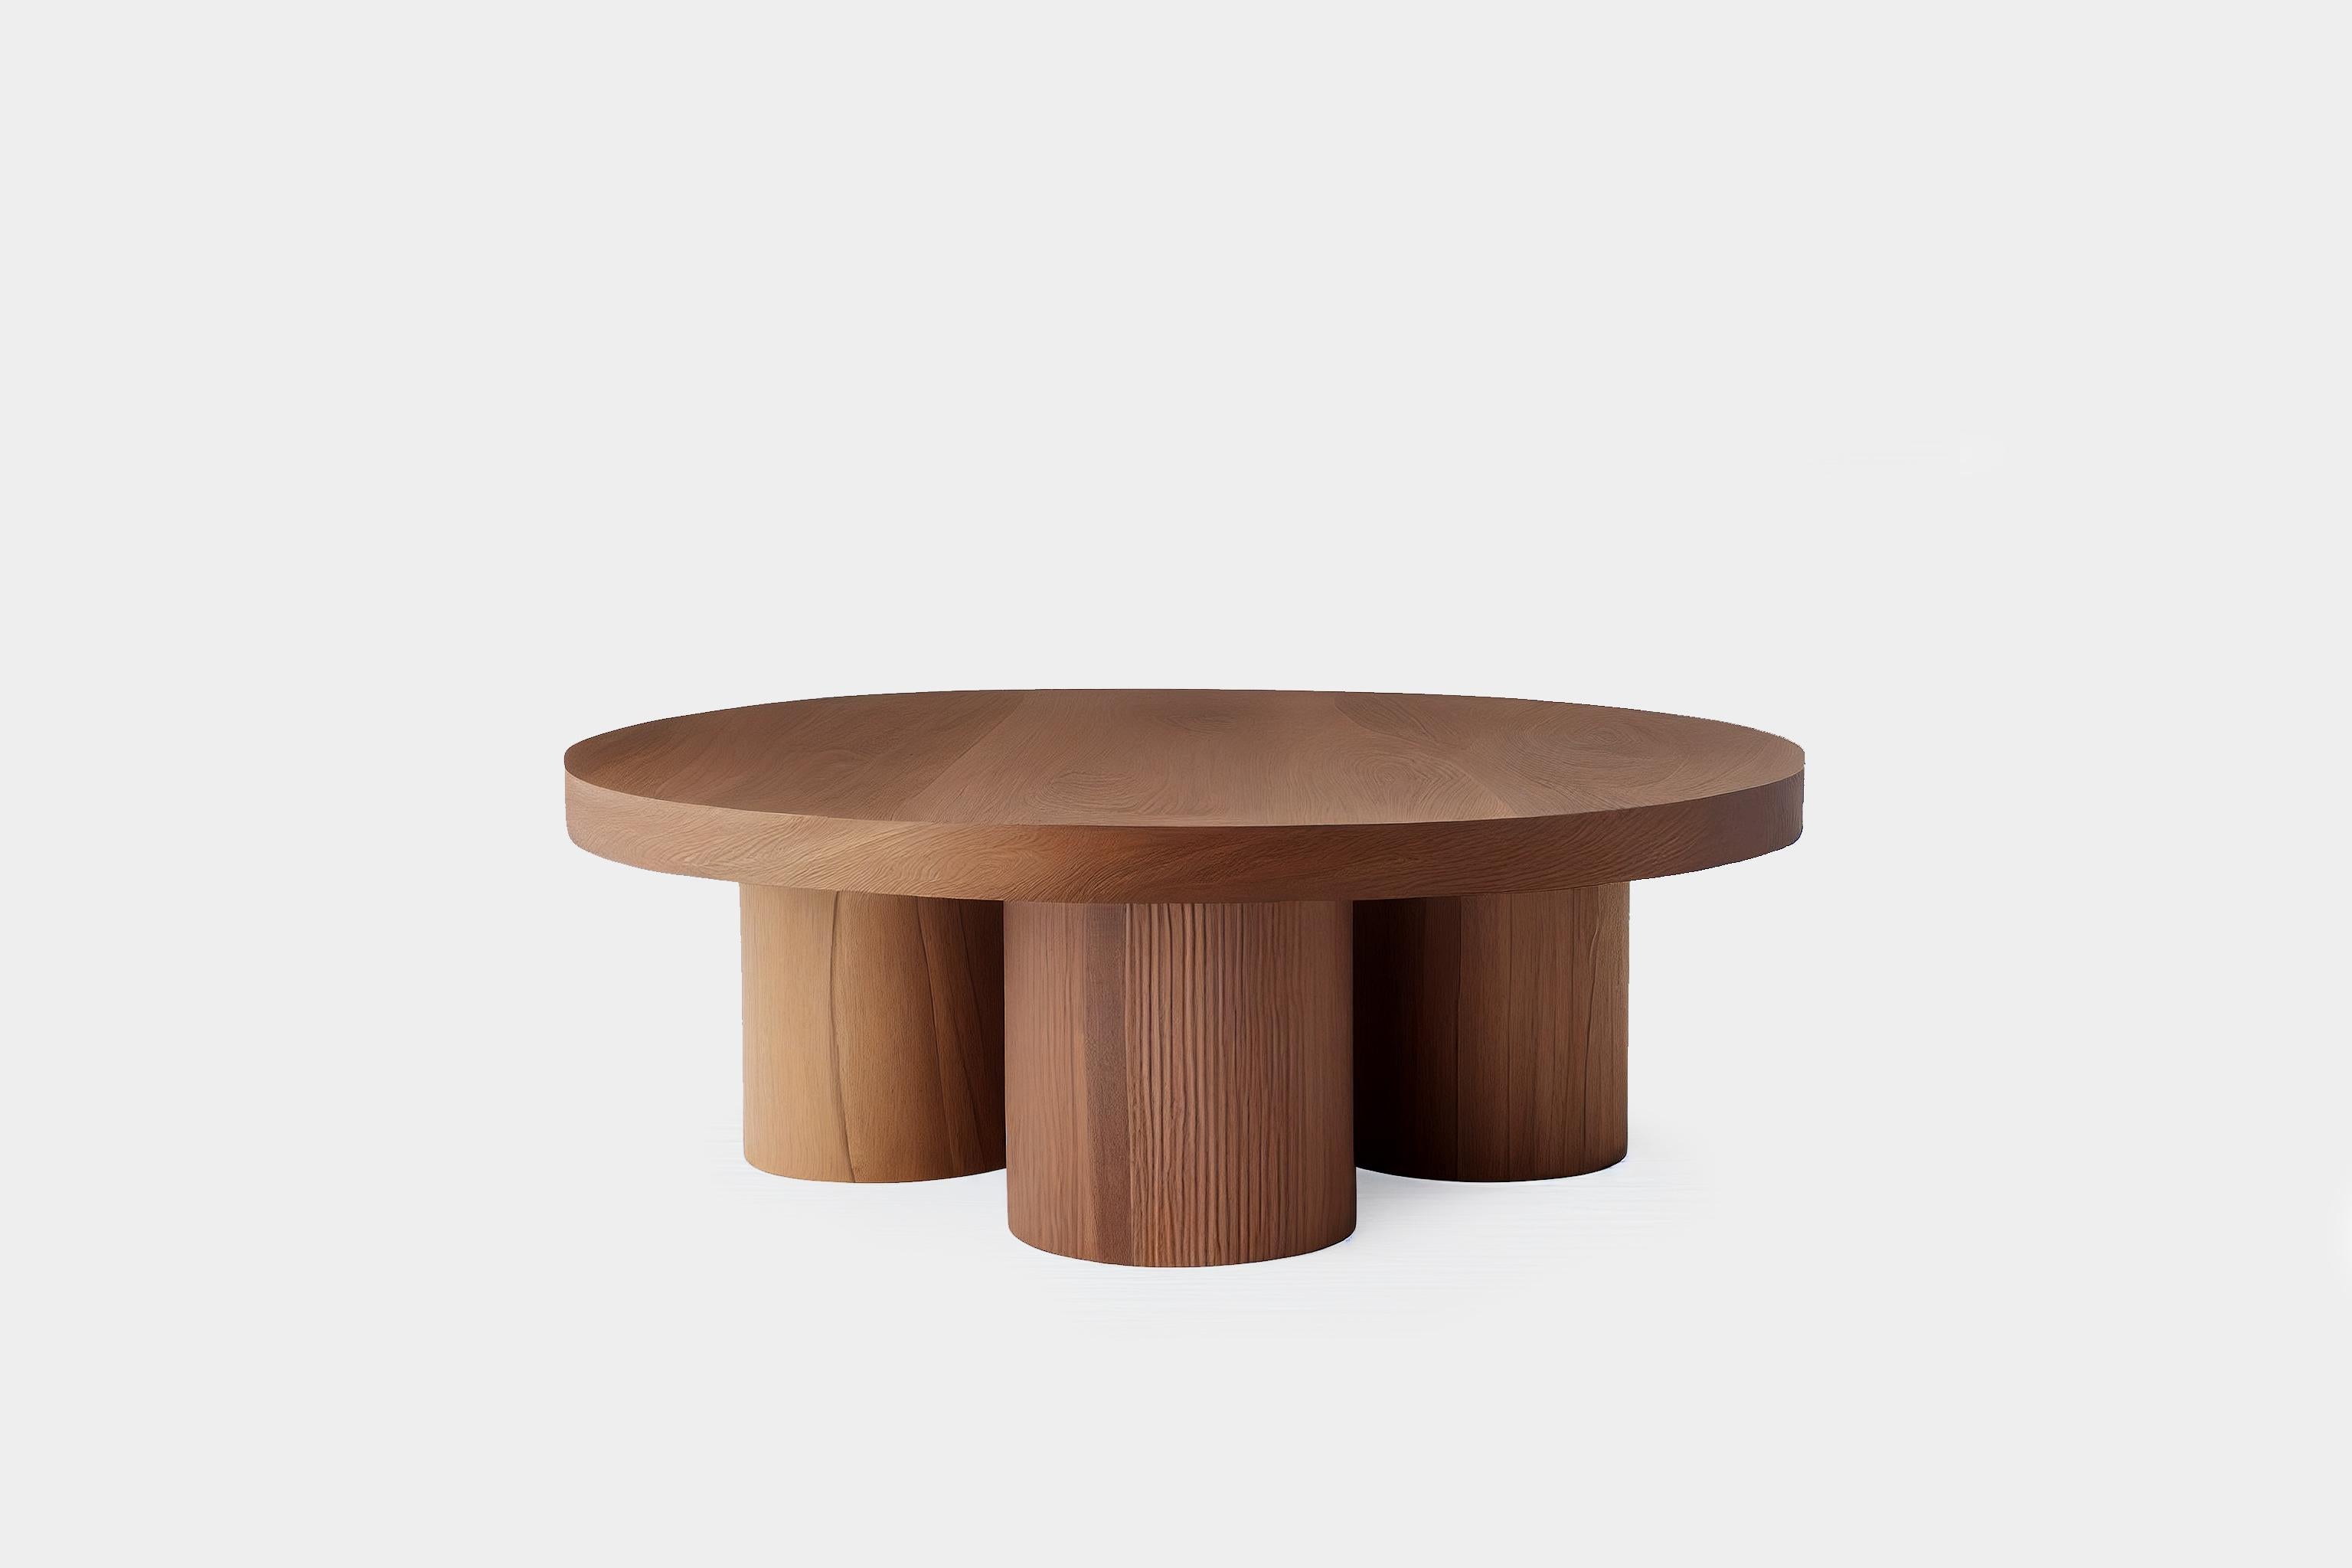 Brutalist Round Coffee Table in Red Oak Wood Veneer, Podio by NONO For Sale 1